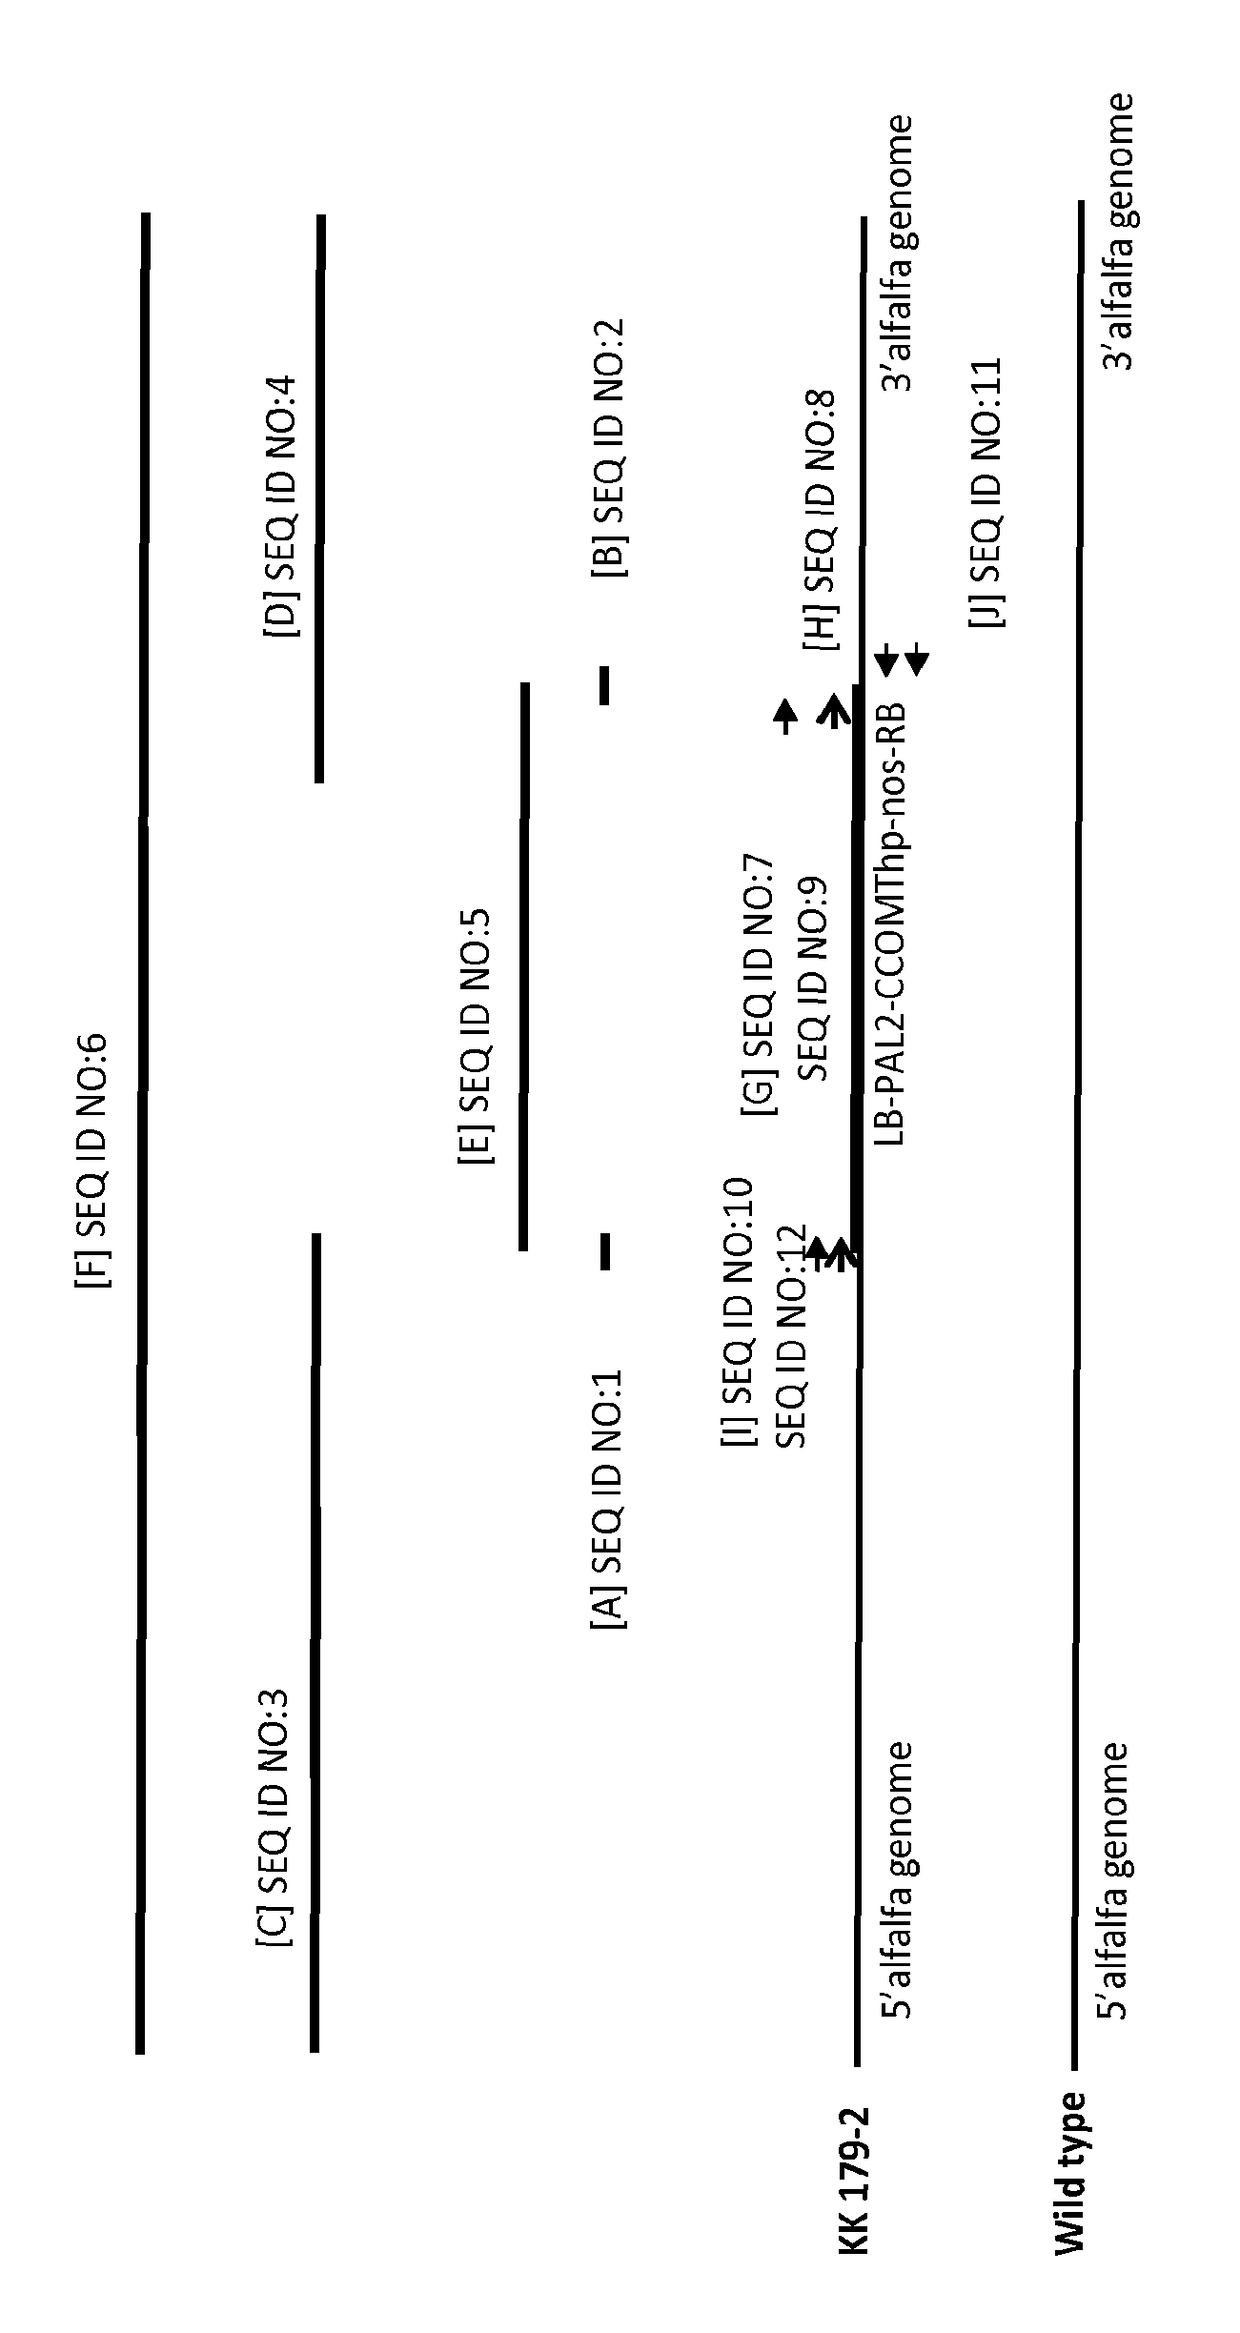 Alfalfa plant and seed corresponding to transgenic event KK 179-2 and methods for detection thereof